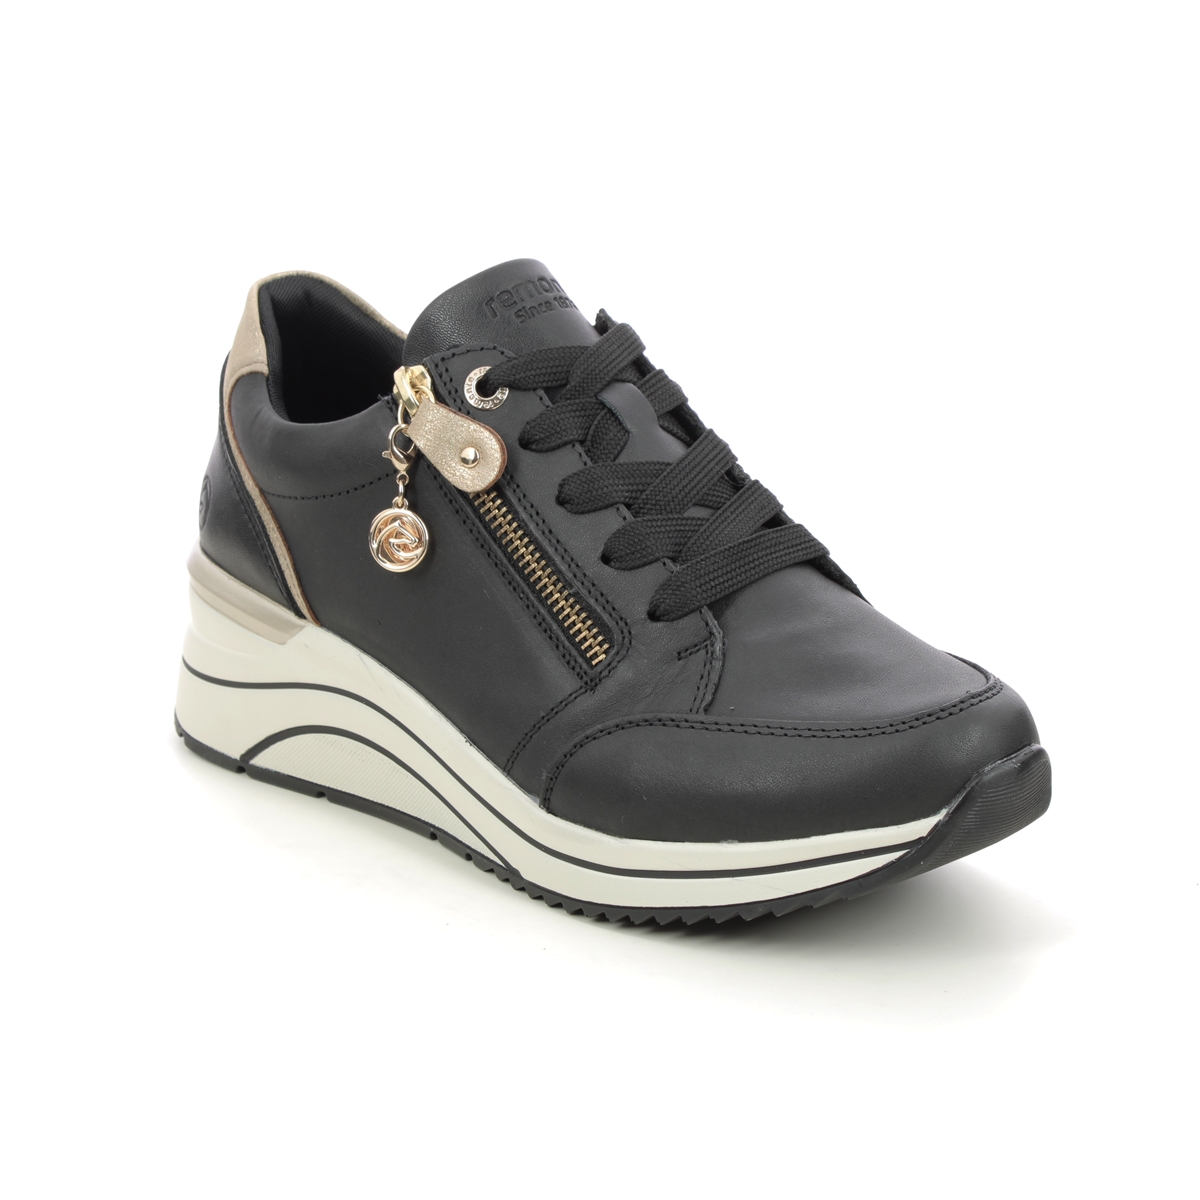 Remonte D0T03-01 Ranzip Wedge Black leather Womens trainers in a Plain Leather in Size 40